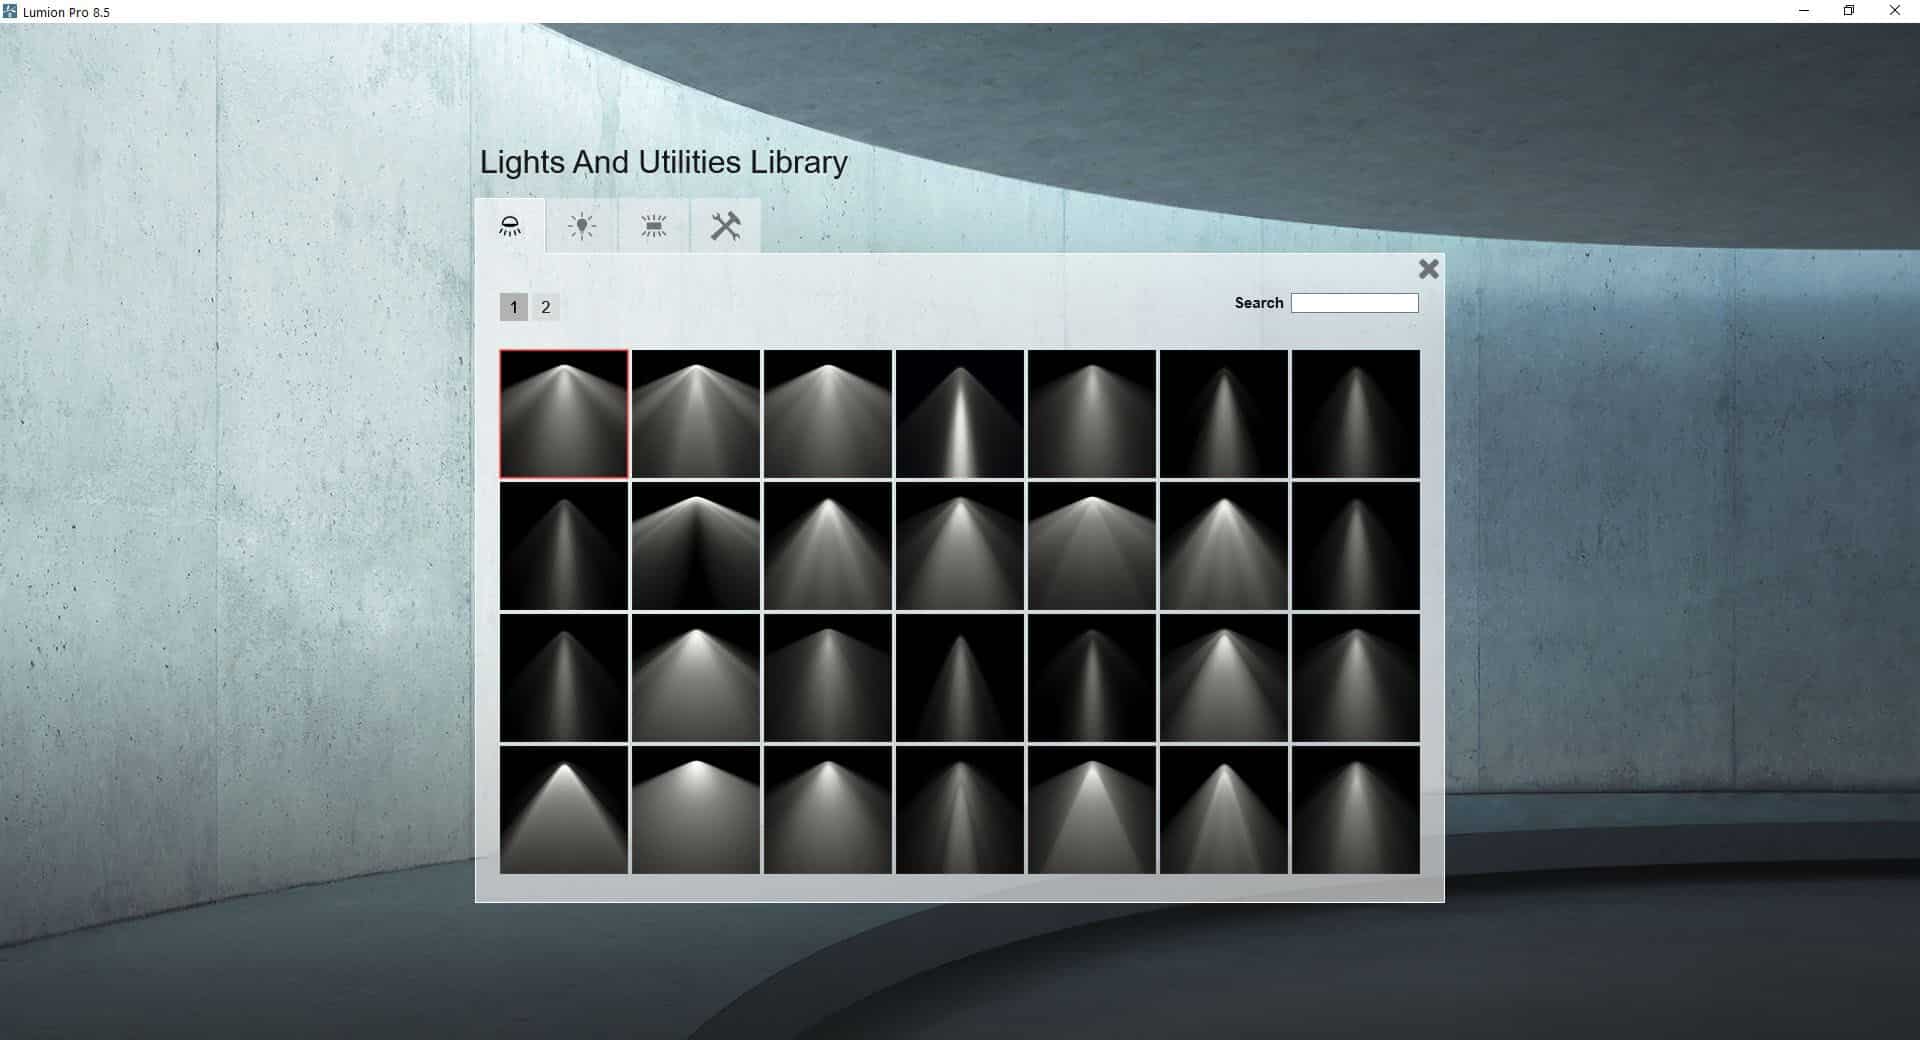 Lumion's Lights and Utilities Library - Spotlights Tab